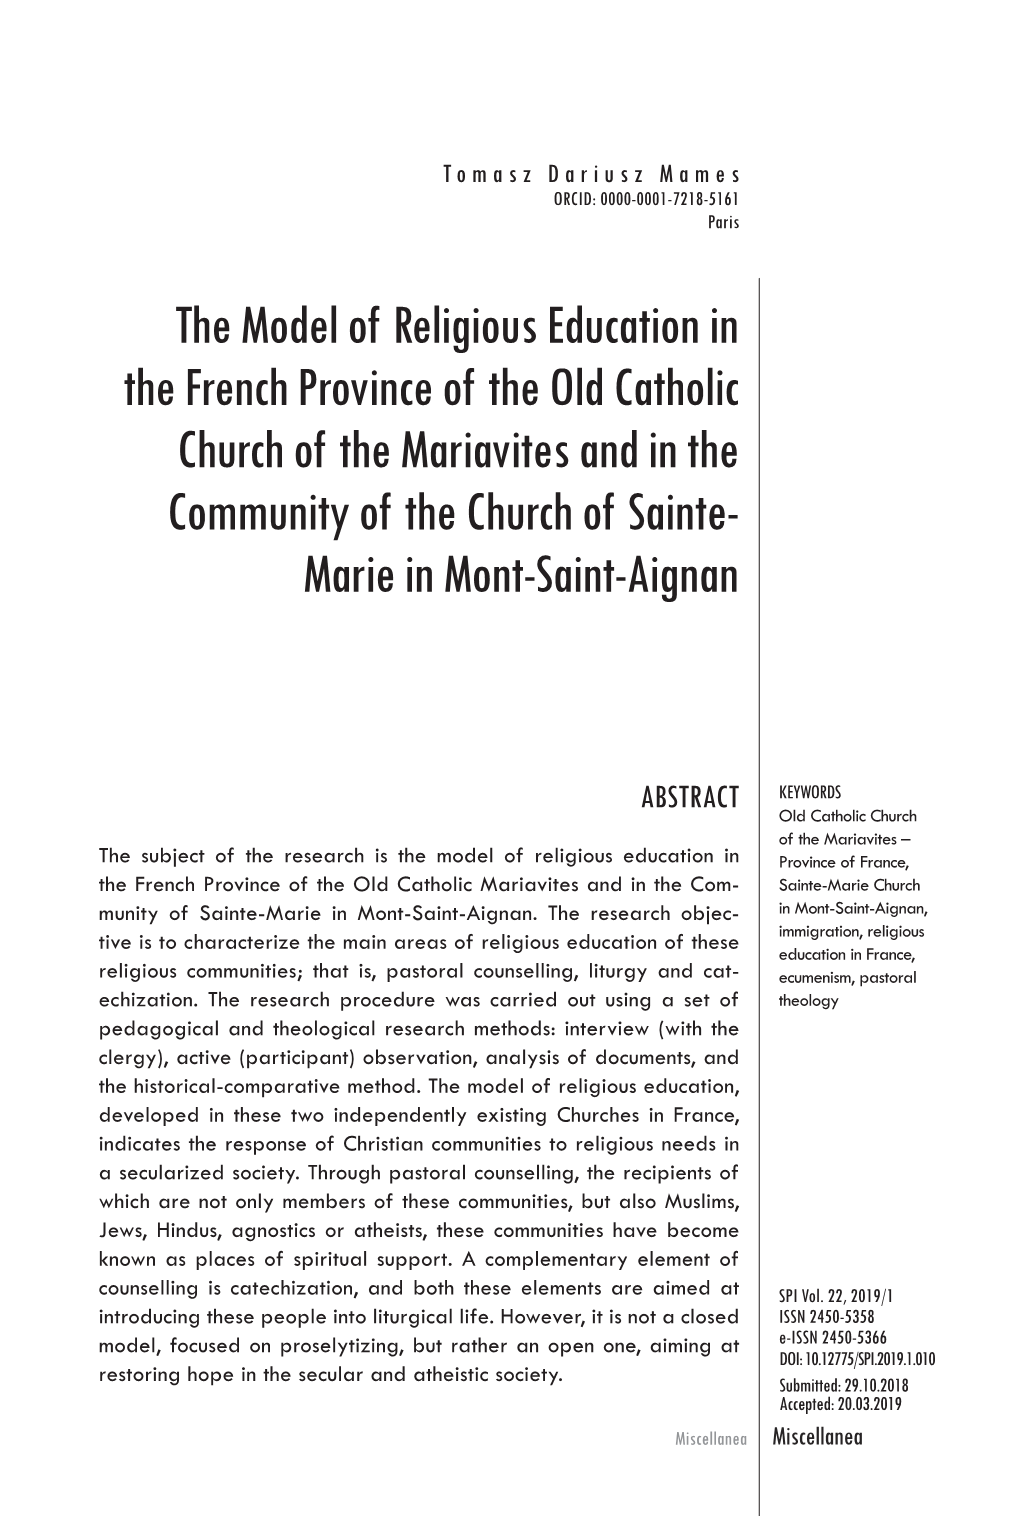 The Model of Religious Education in the French Province of the Old